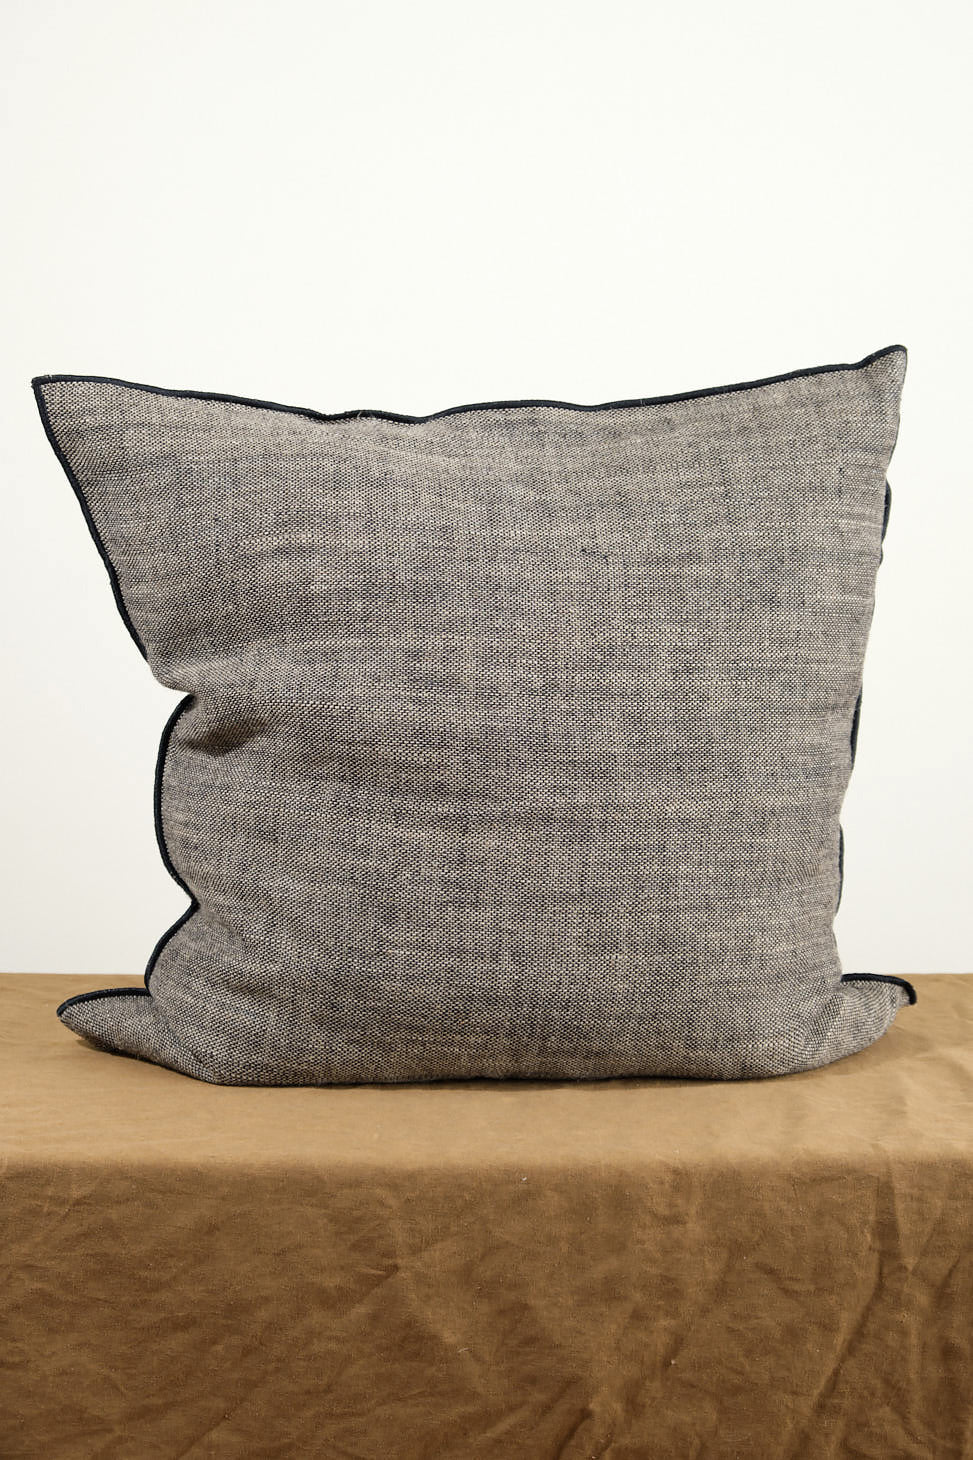 26" X 26" Chinee Canvas Rustique Cushion on table